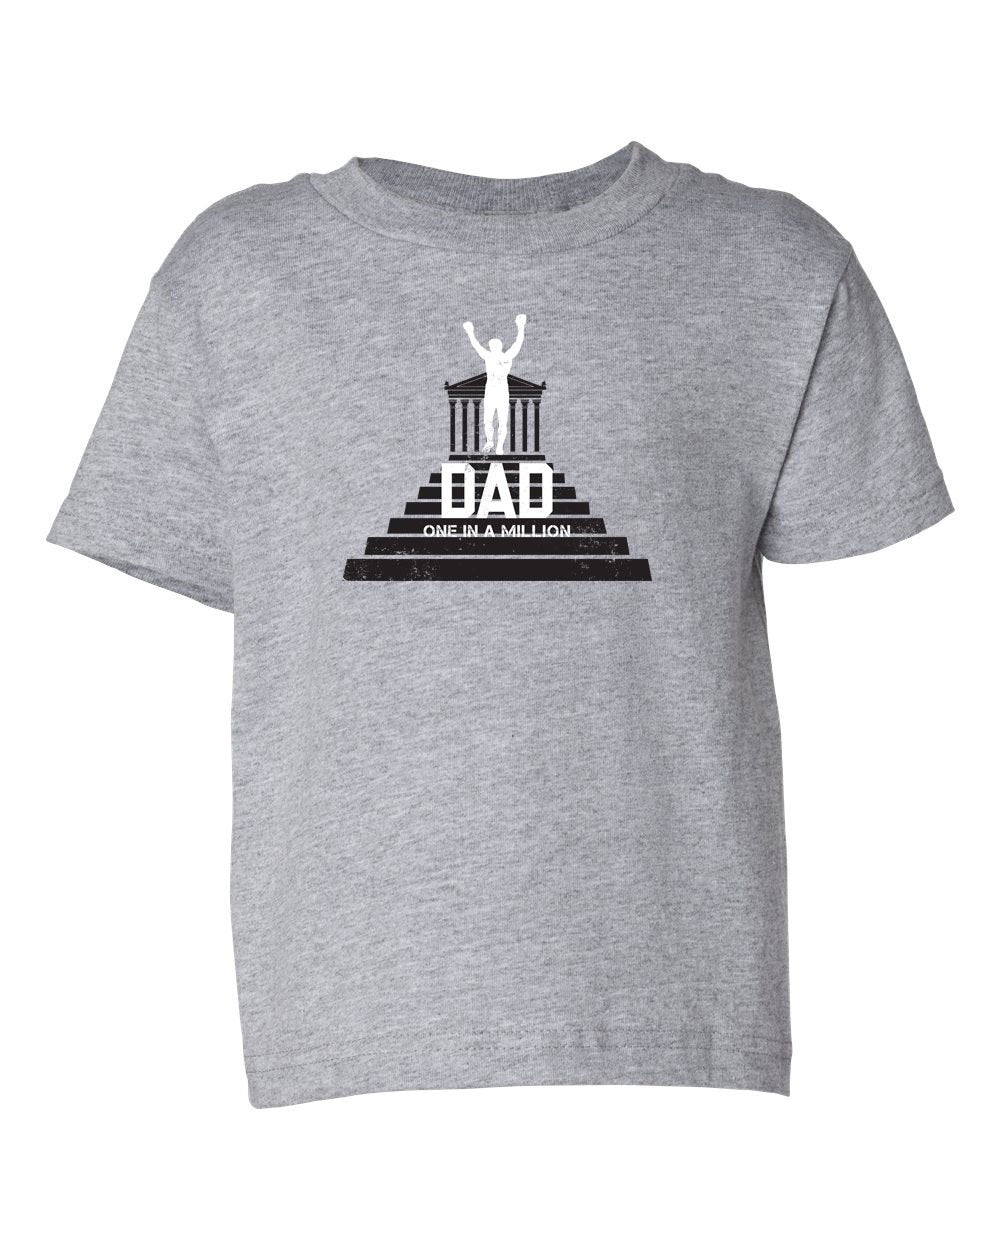 One in a Million Dad TODDLER T-Shirt